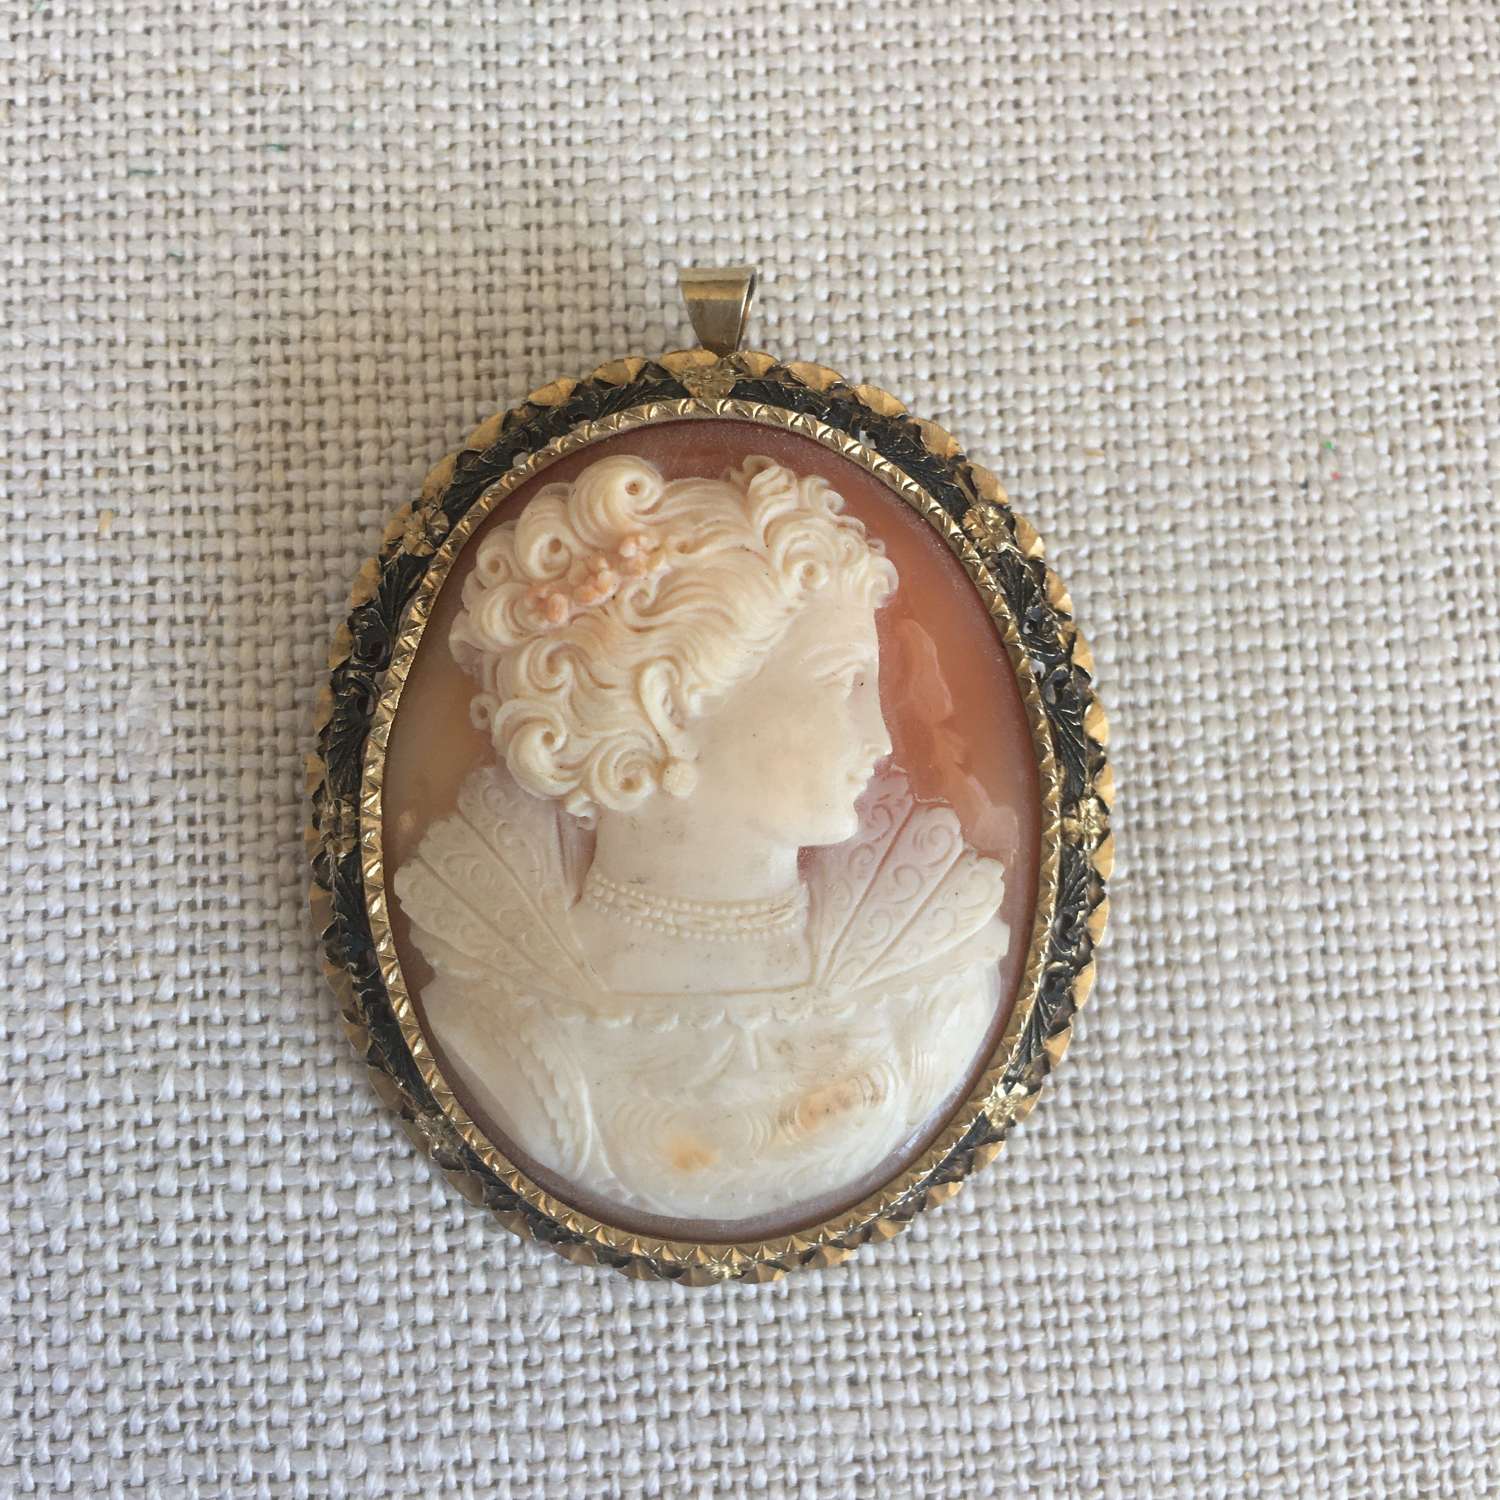 Vintage shell cameo of Queen Mary